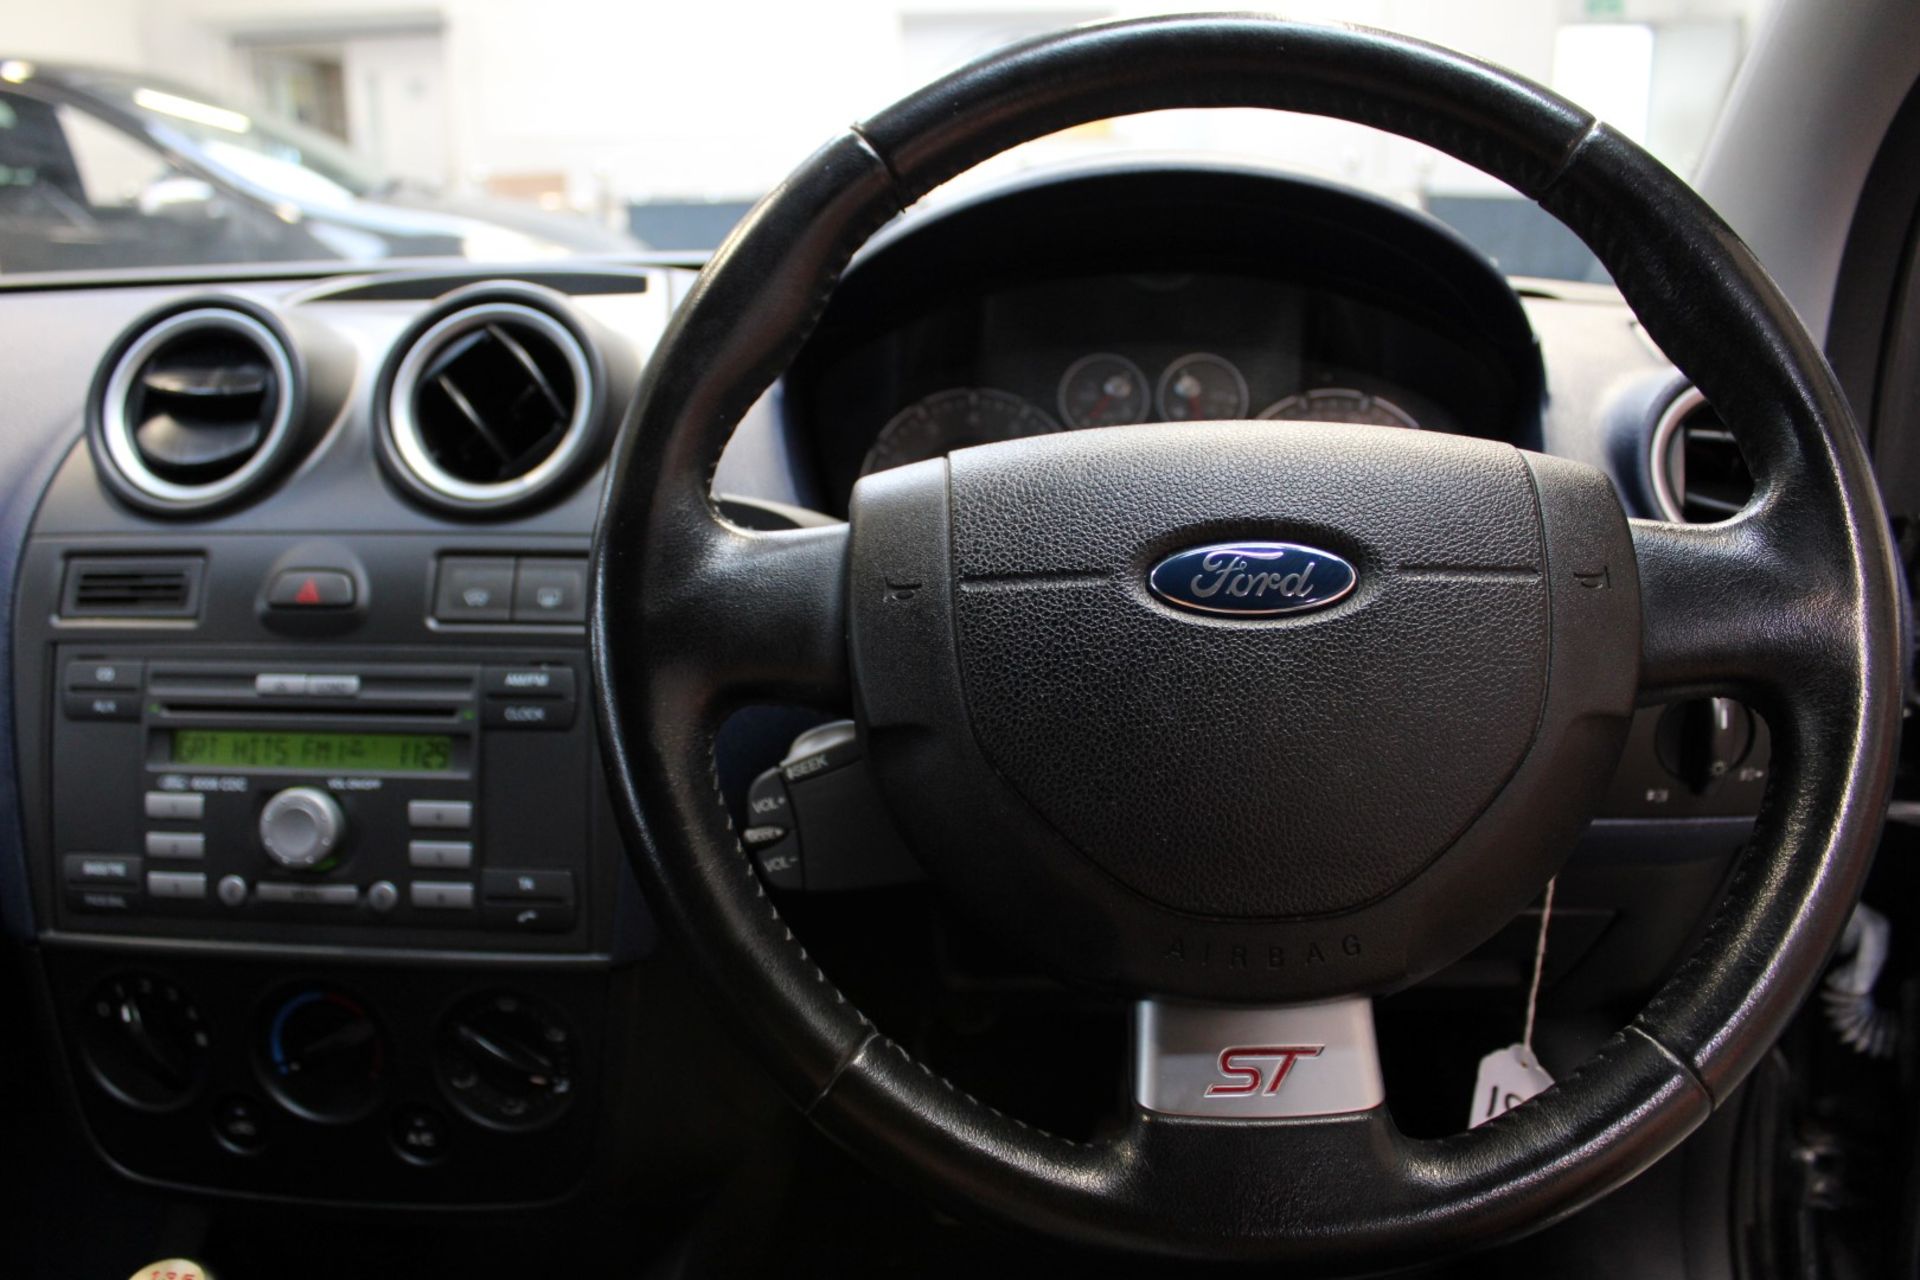 06 06 Ford Fiesta ST - Image 12 of 27